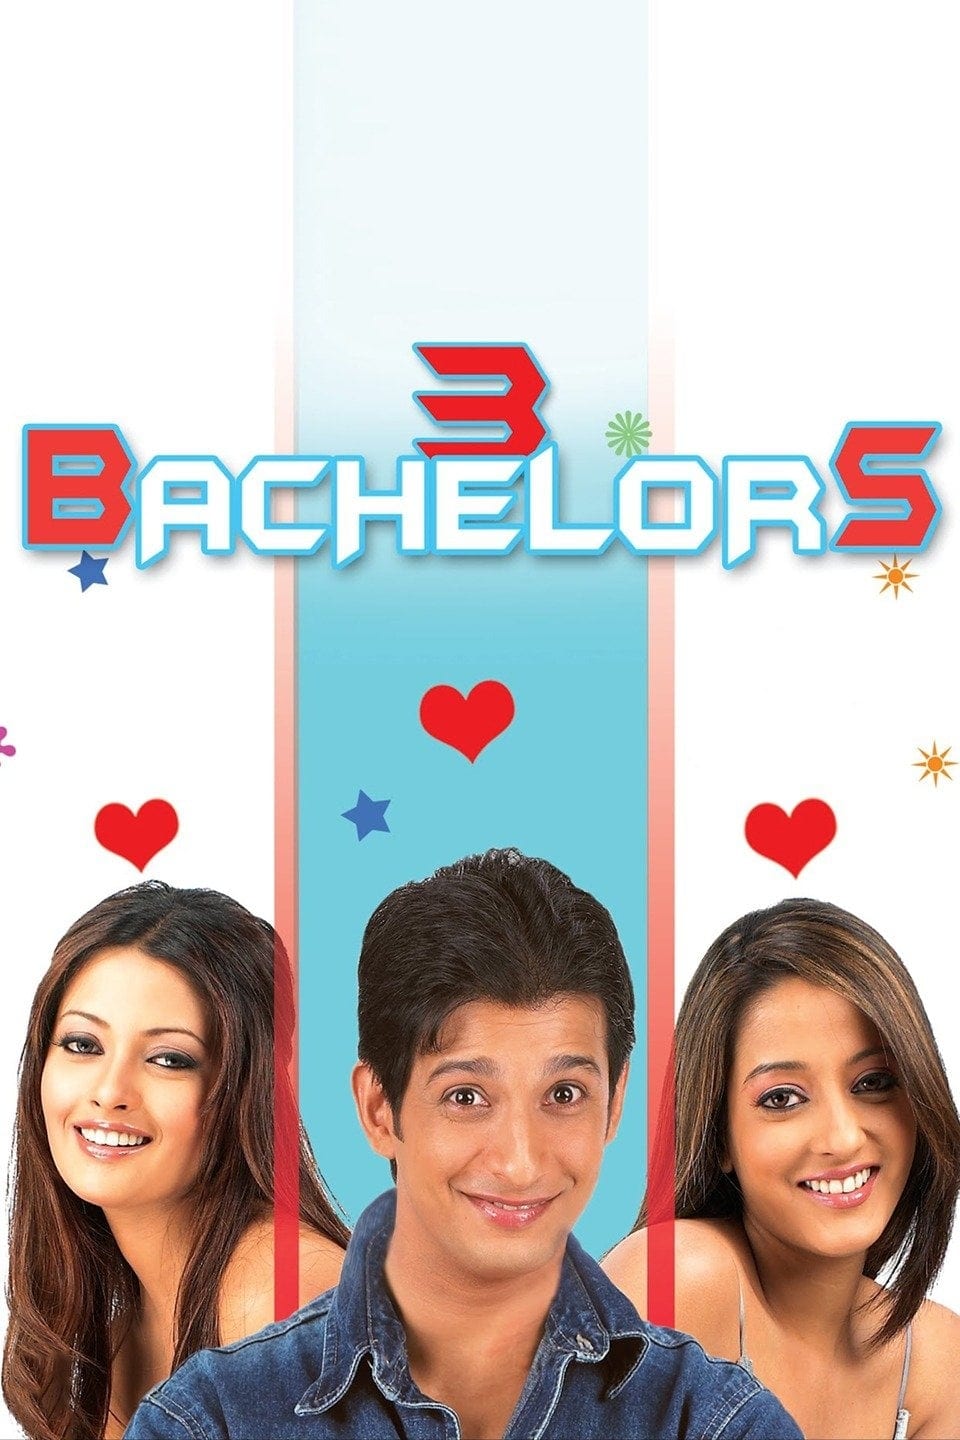 Poster for the movie "3 Bachelors"